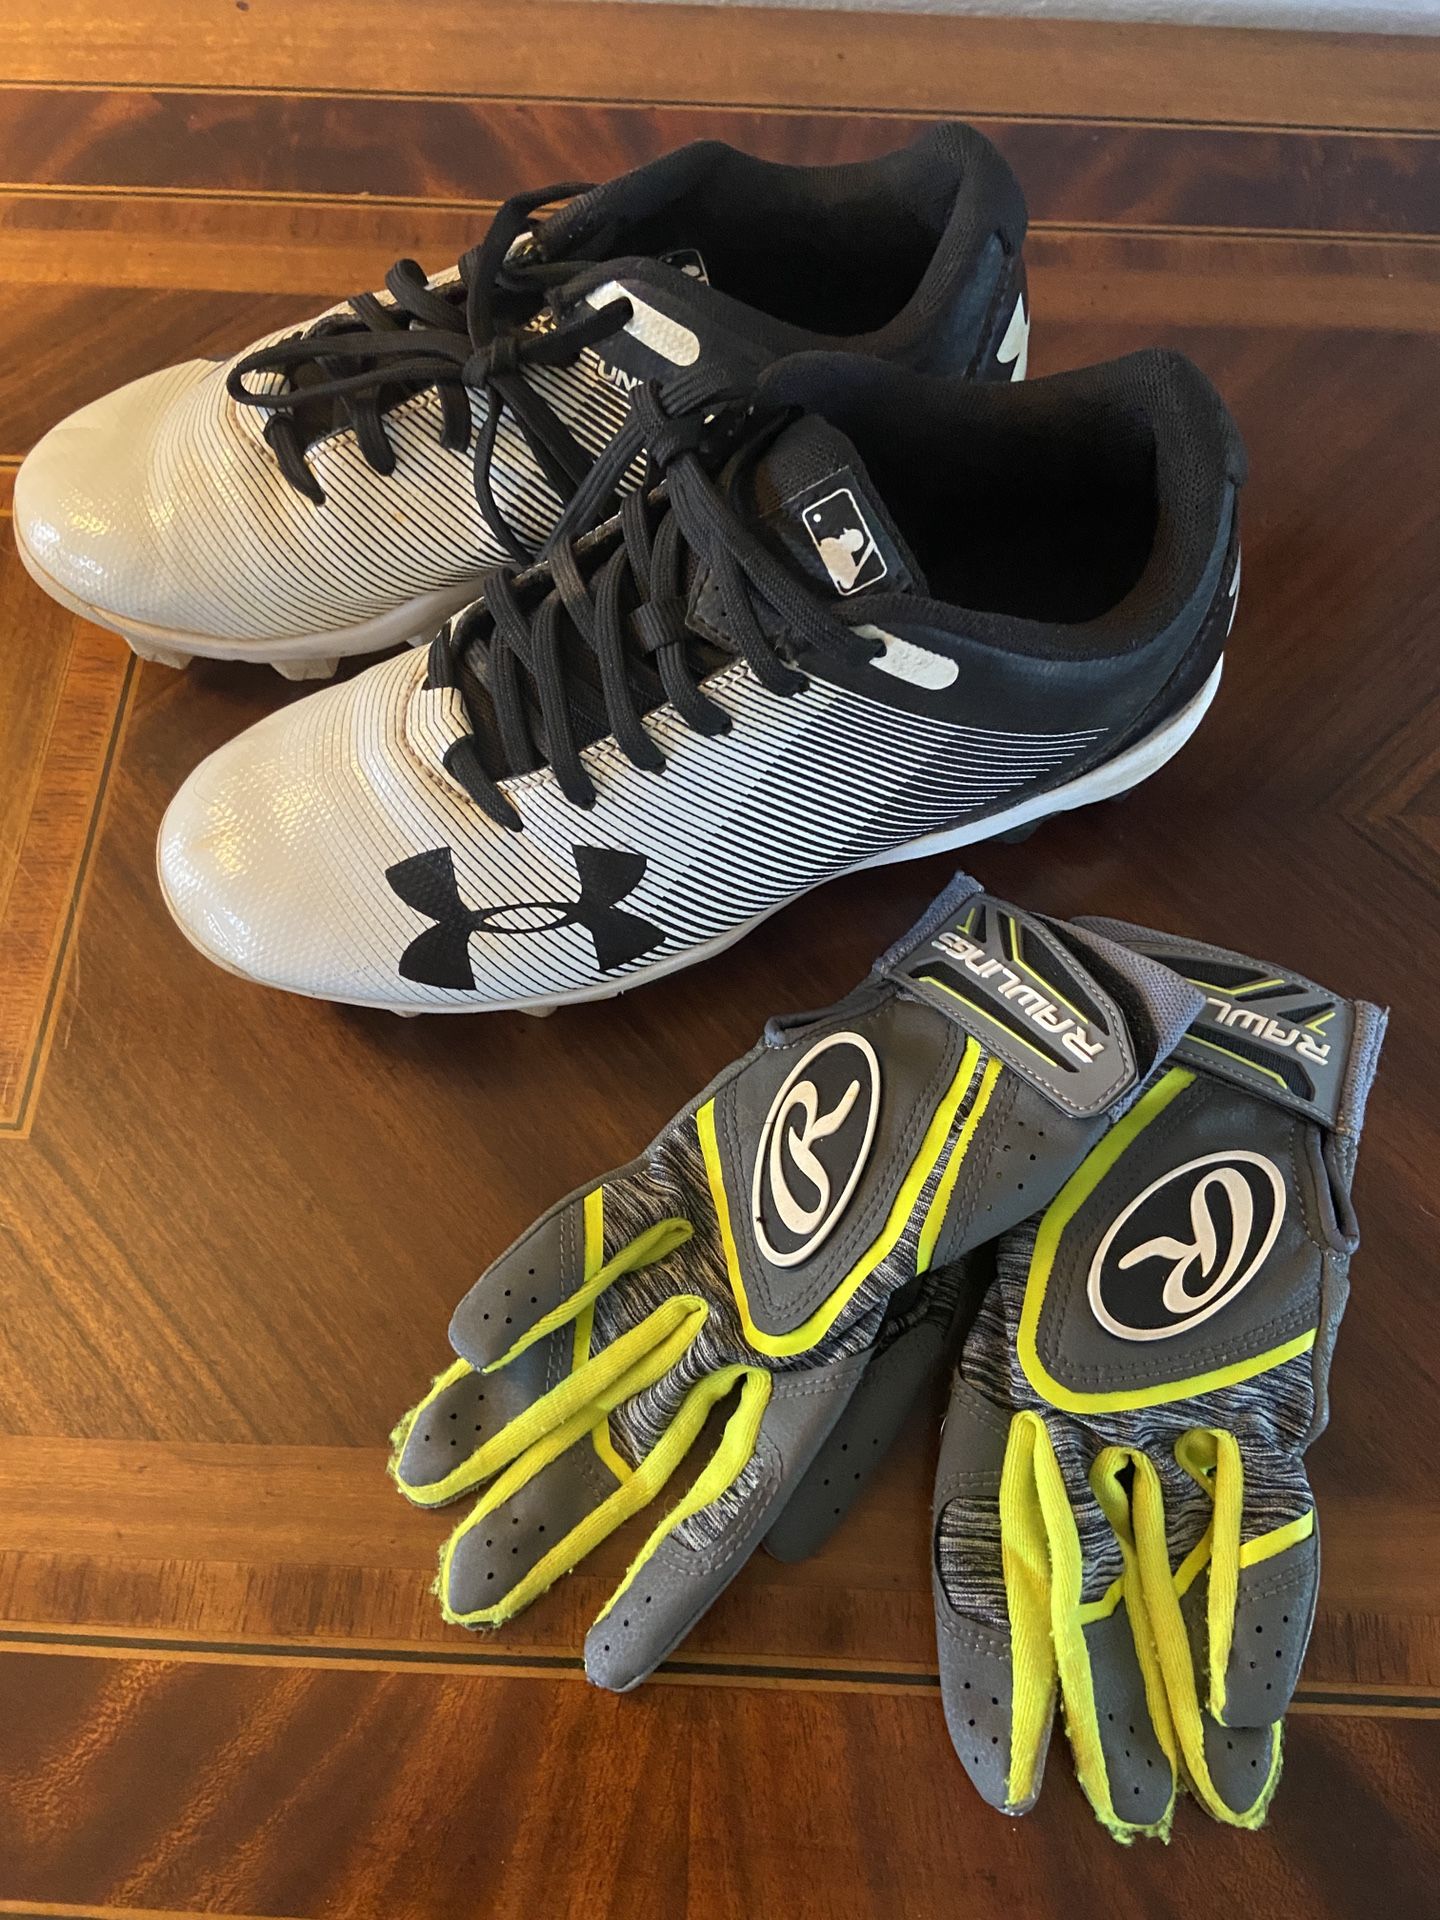 Under Armour Youth Cleats And Rawlings Batting Gloves 